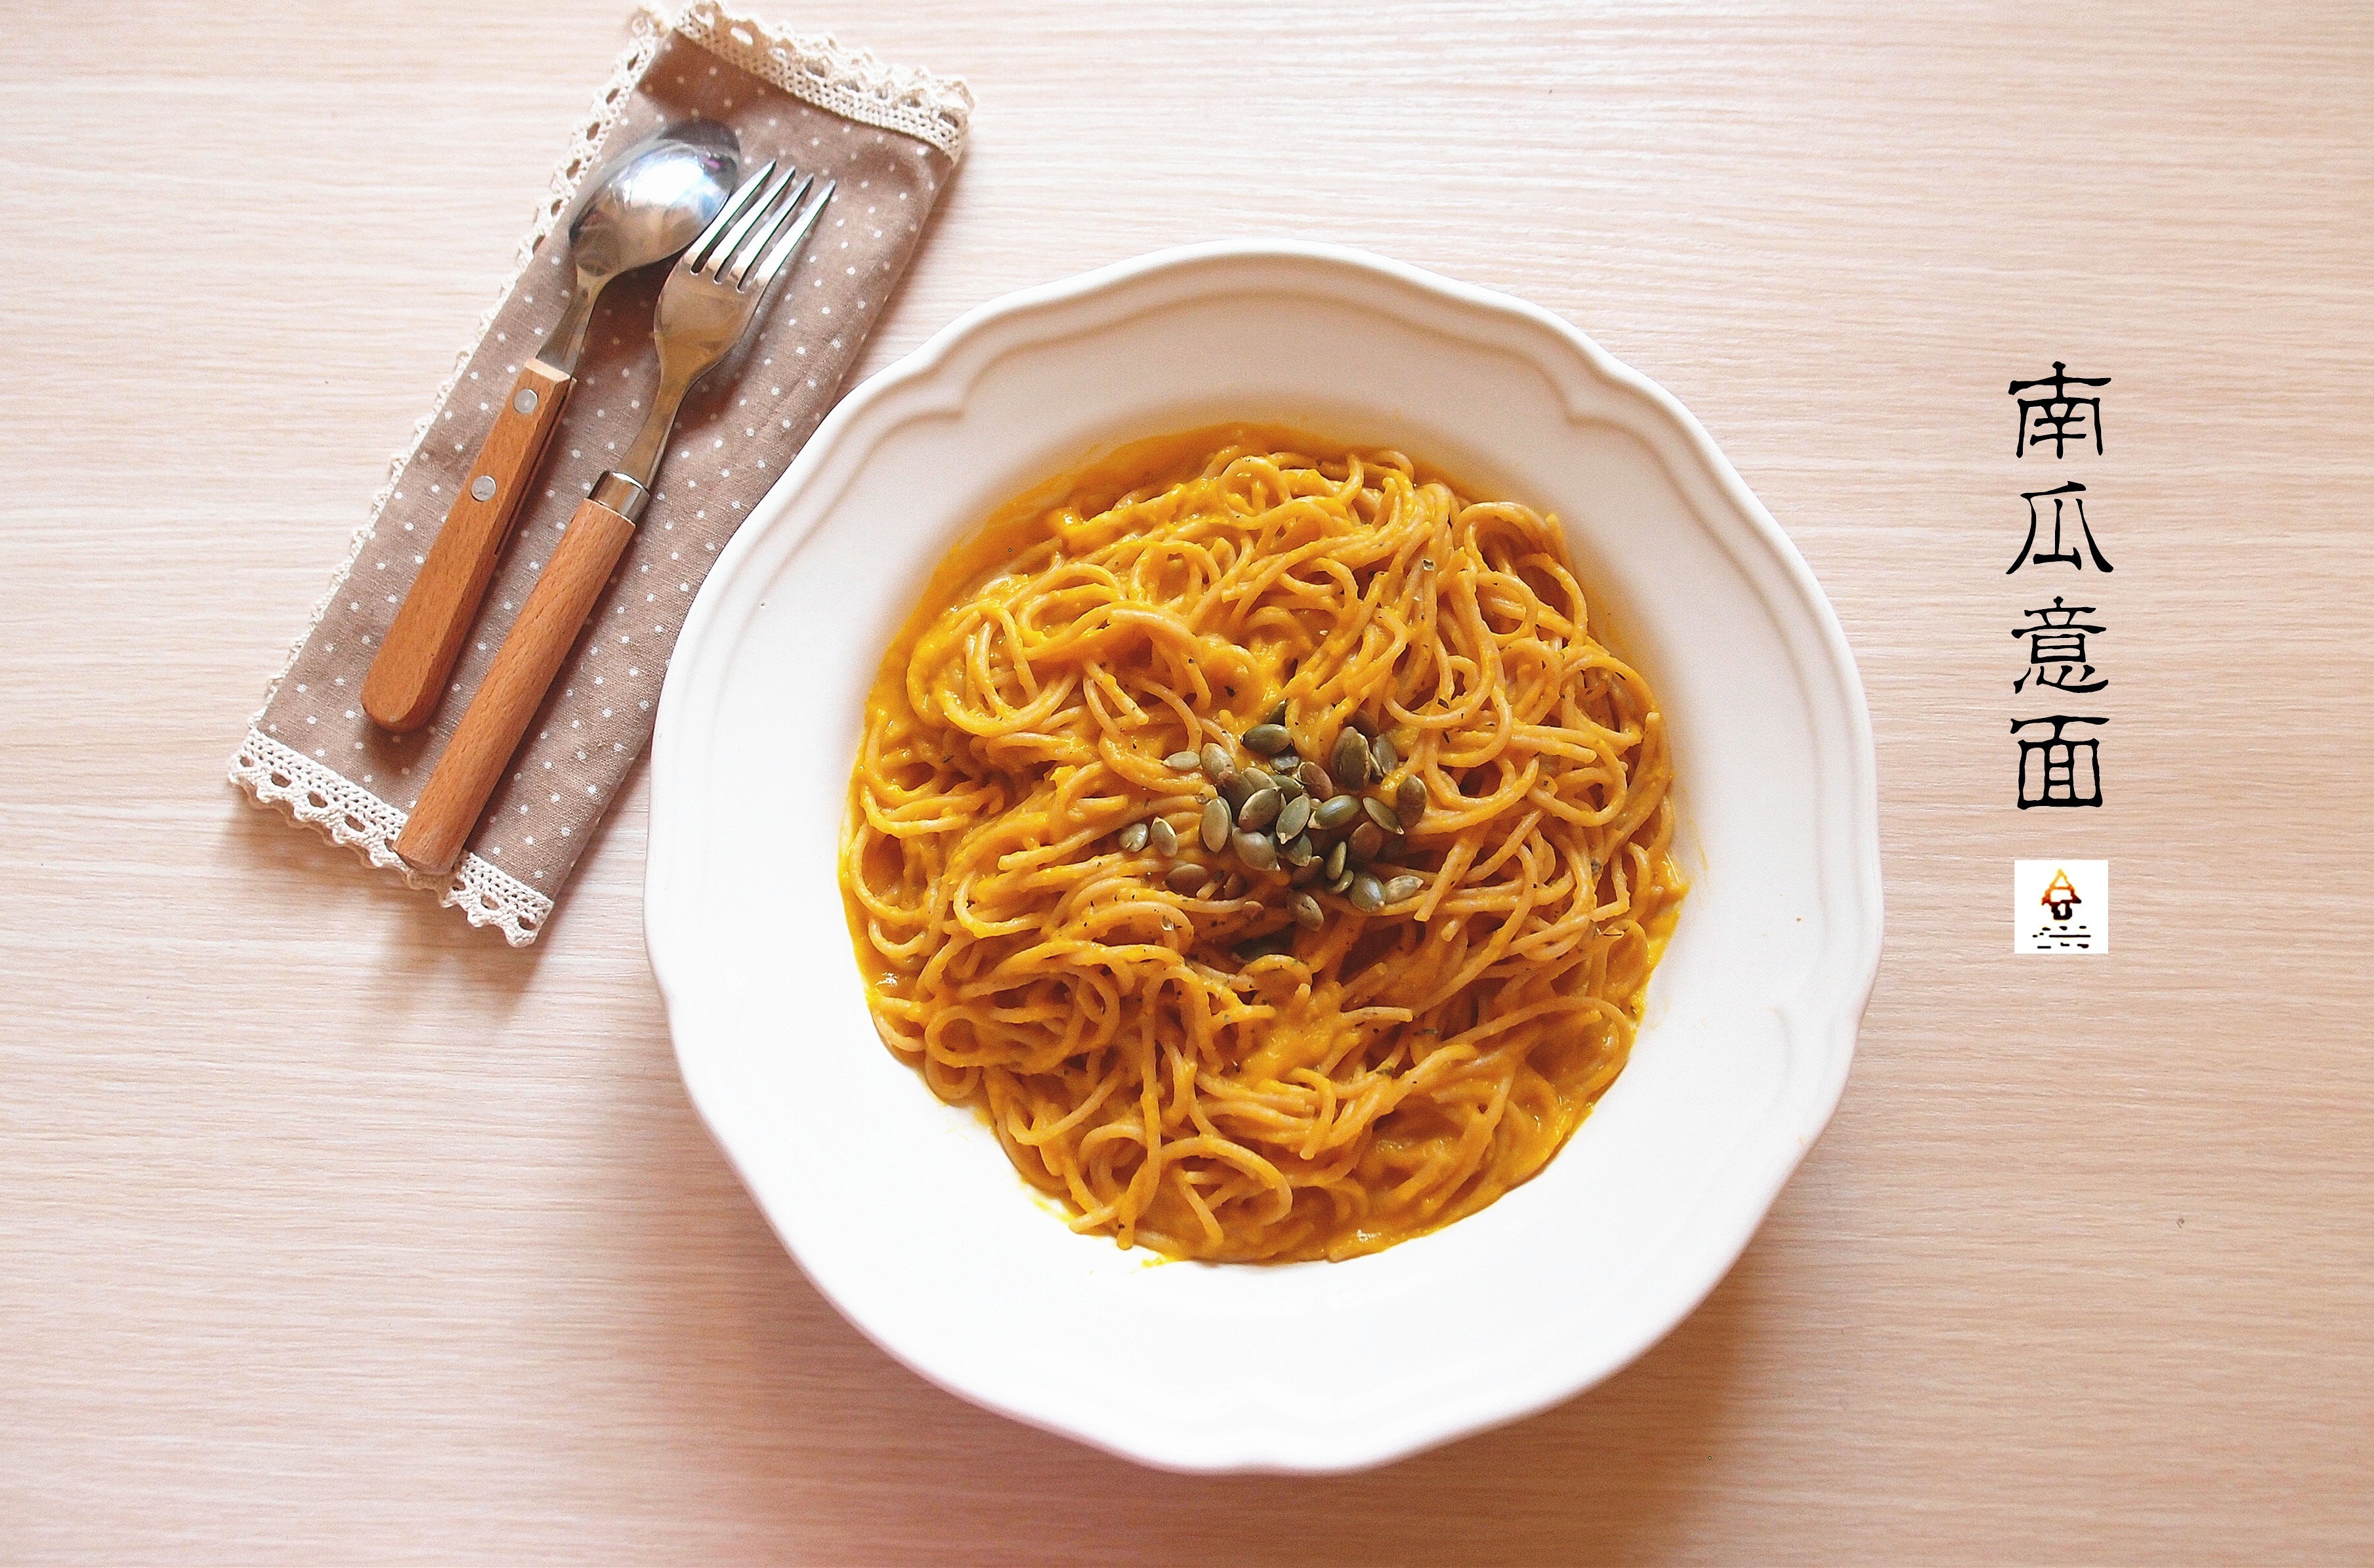 
Pumpkin meaning side (the practice of Spaghetti With Pumpkin Sauce)